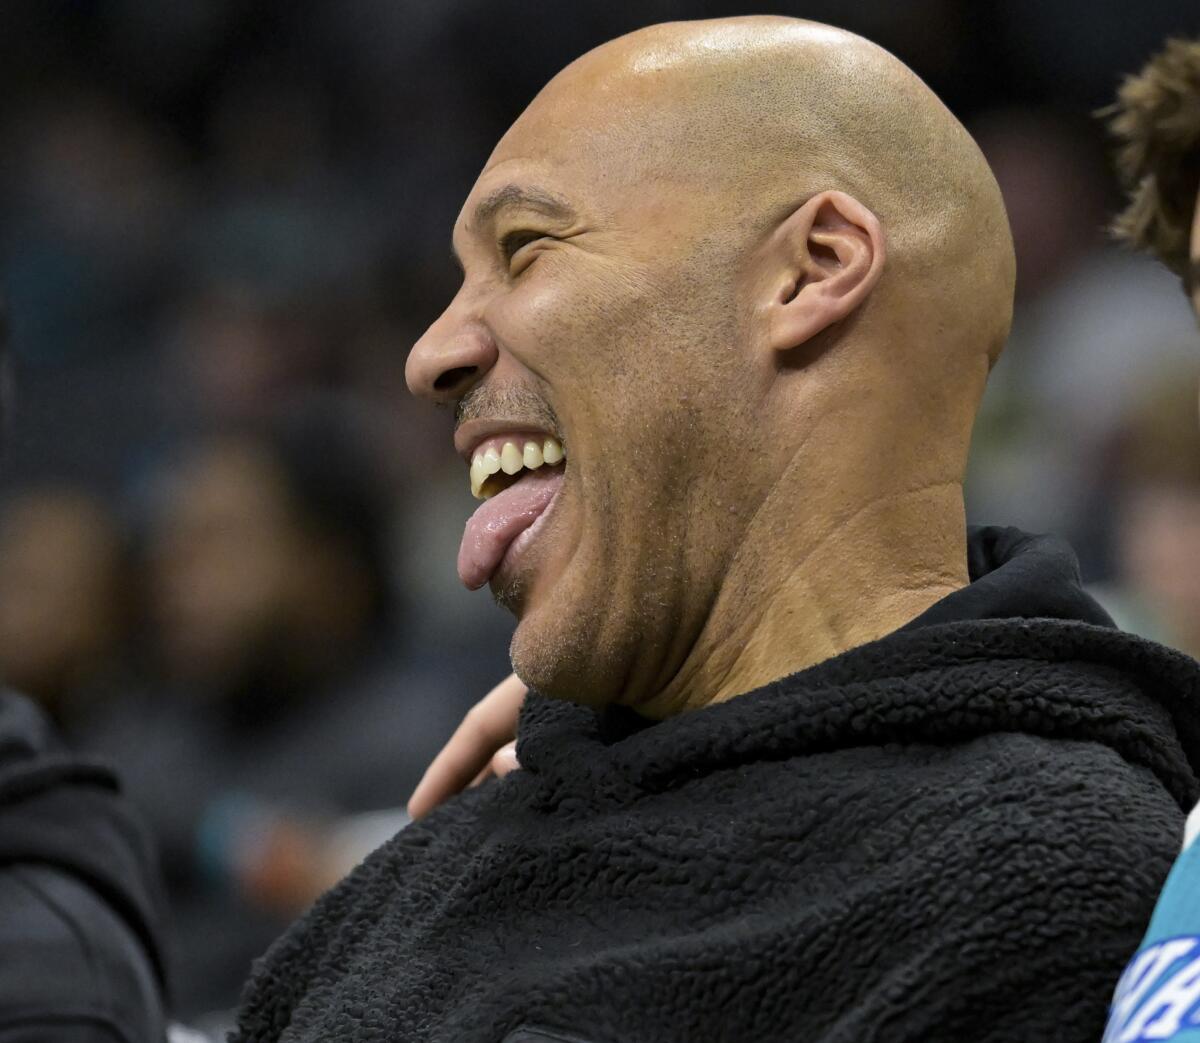 LaVar Ball knows why LaMelo, Lonzo are injured: ‘raggedy shoes’ and ‘rooty-toot workouts’